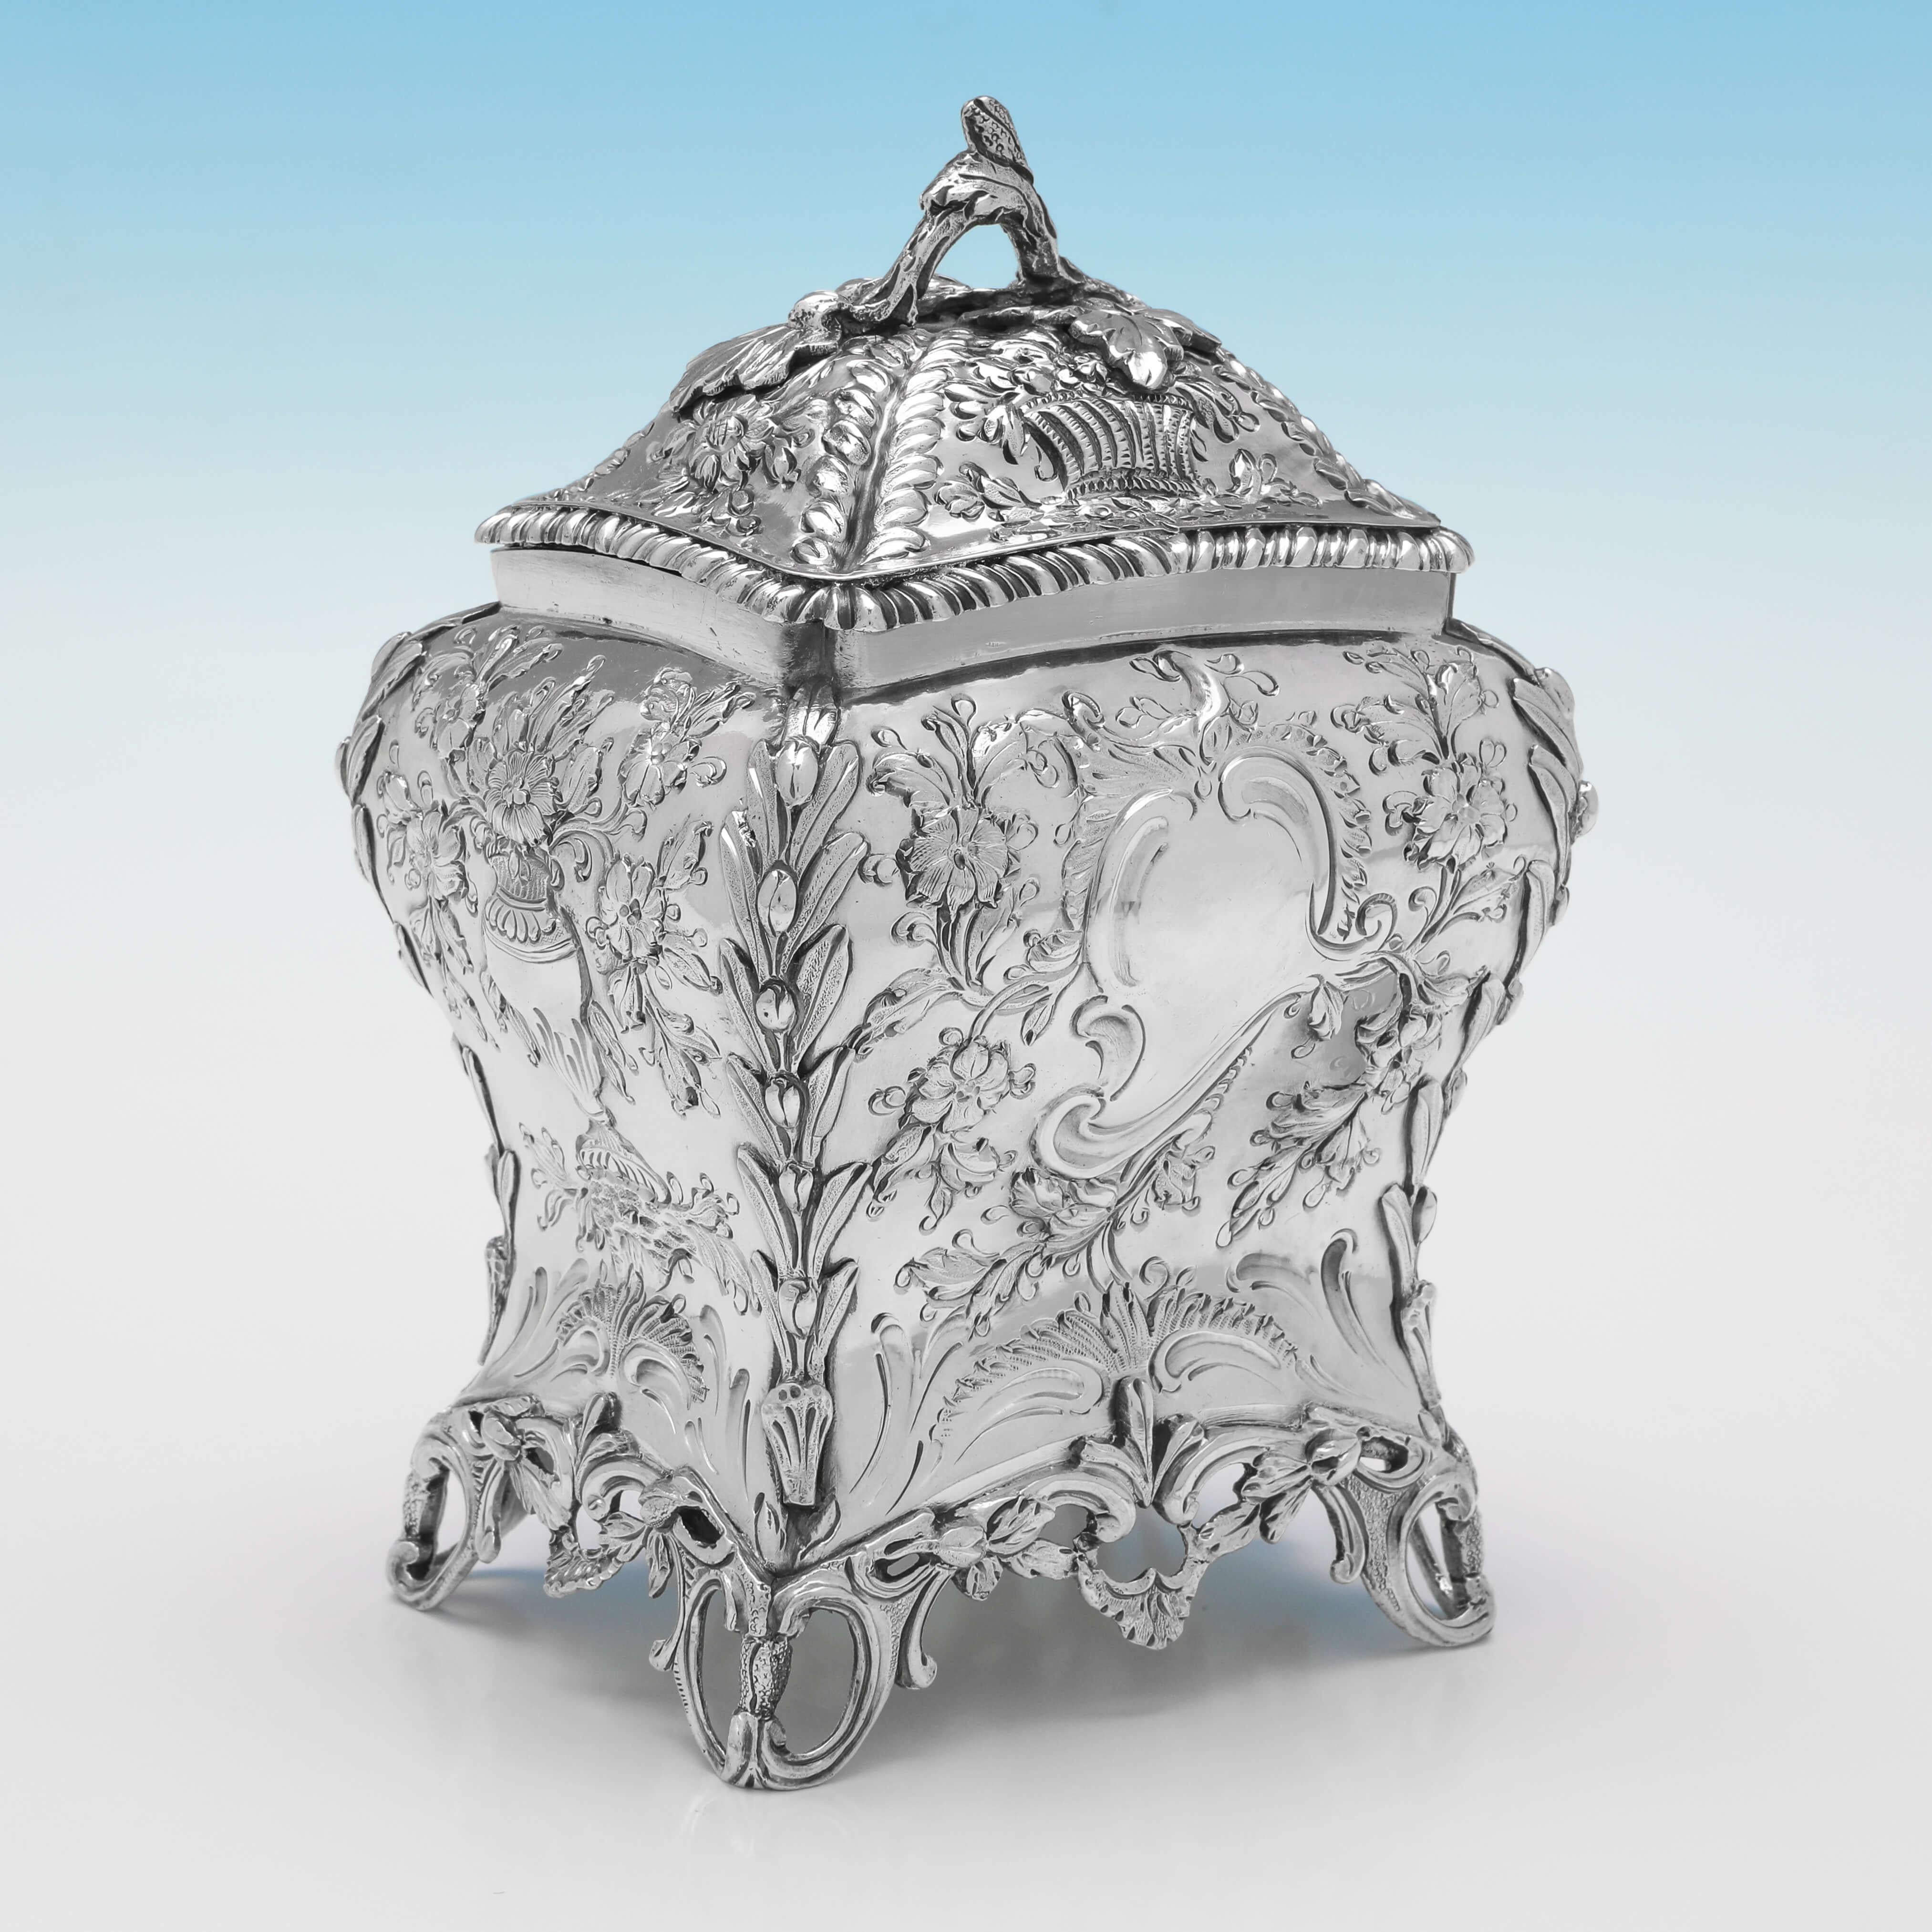 Hallmarked in London in 1768 by Henry Bailey, this stunning pair of George III period, Antique Sterling Silver Tea Caddies, feature Rococo chasing throughout, vacant cartouches, and removable lids. 

Each tea caddy measures 6